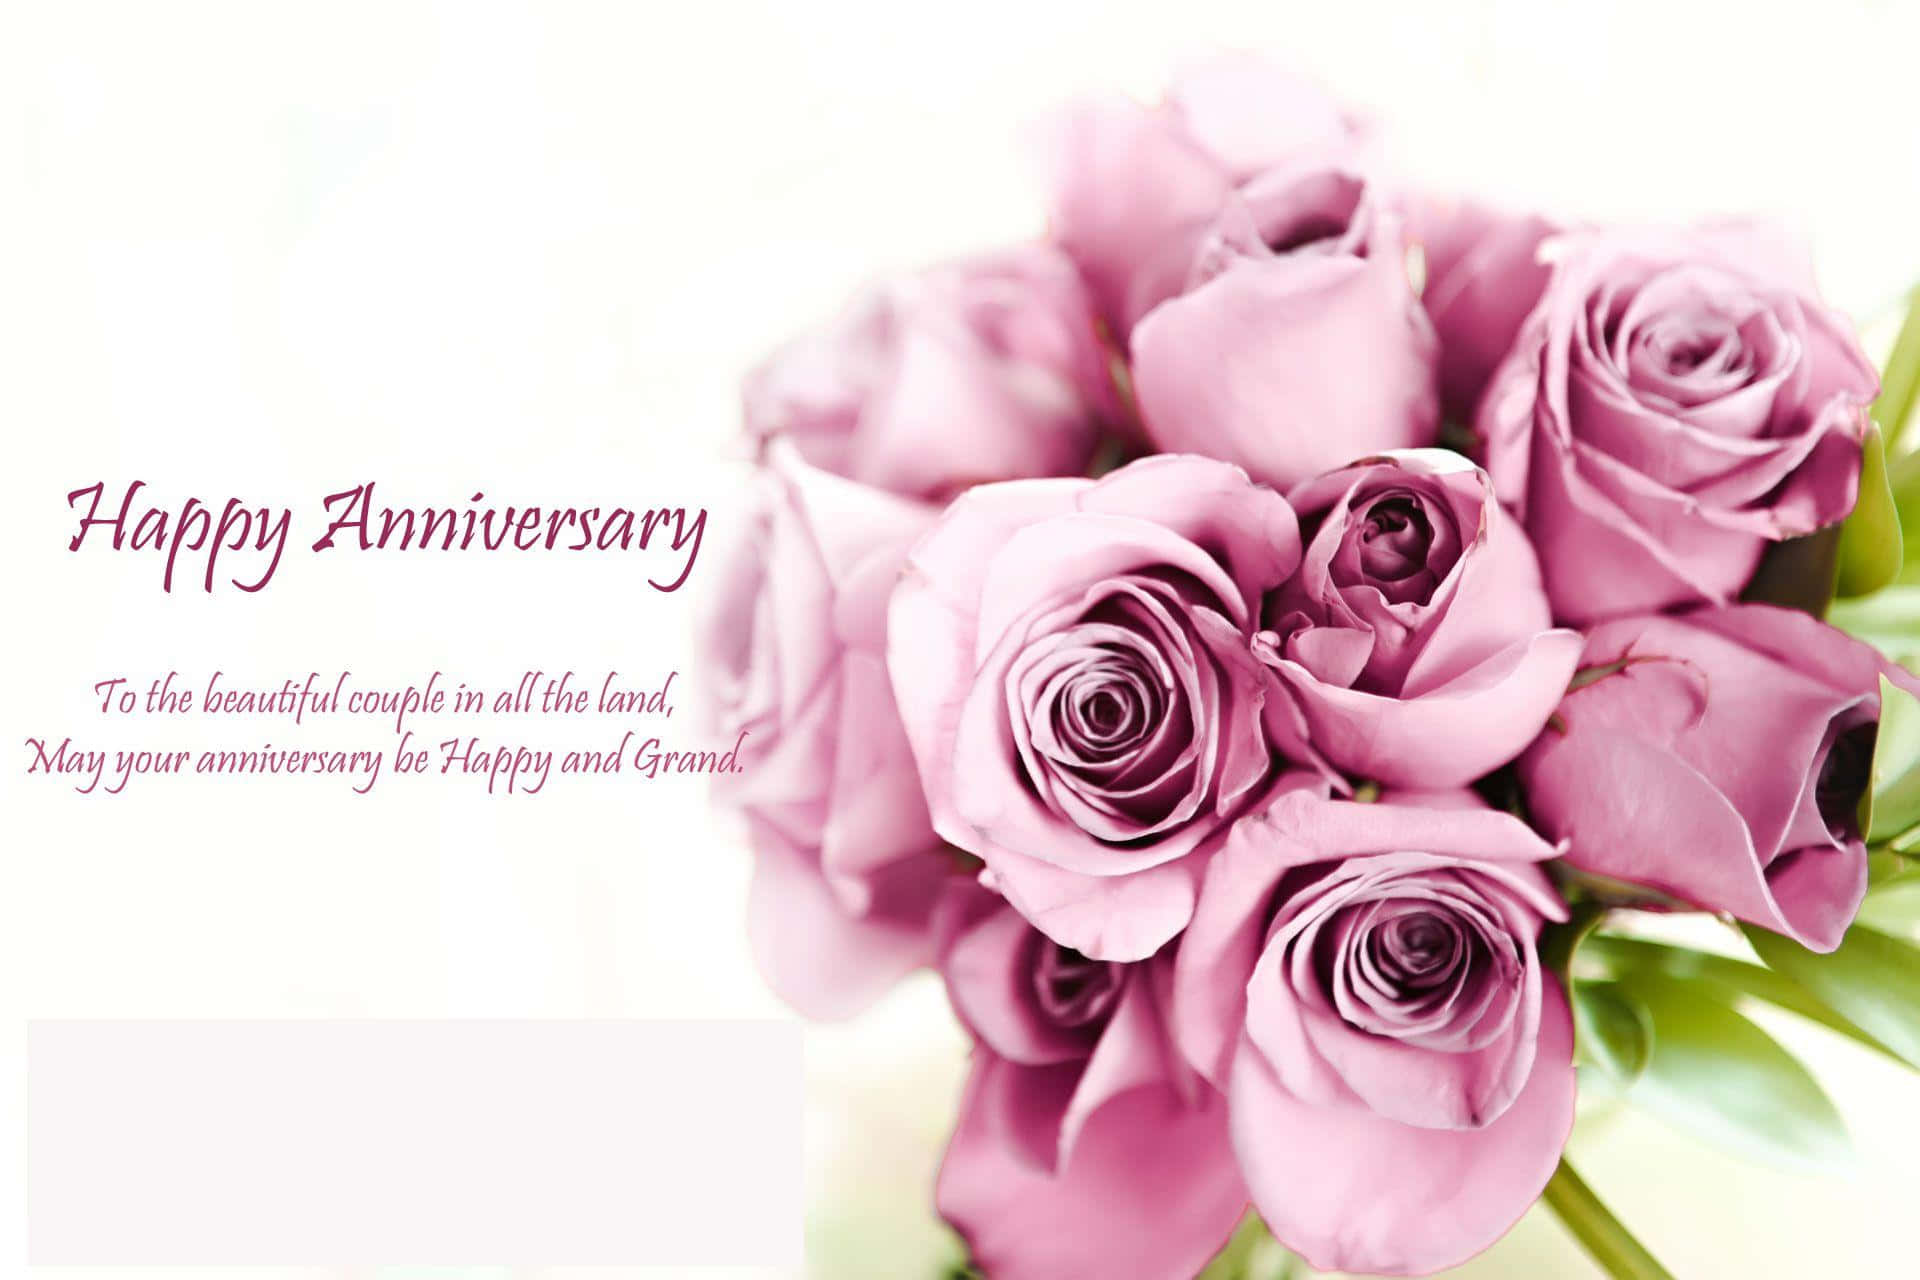 Celebrate your love for each other on your anniversary!